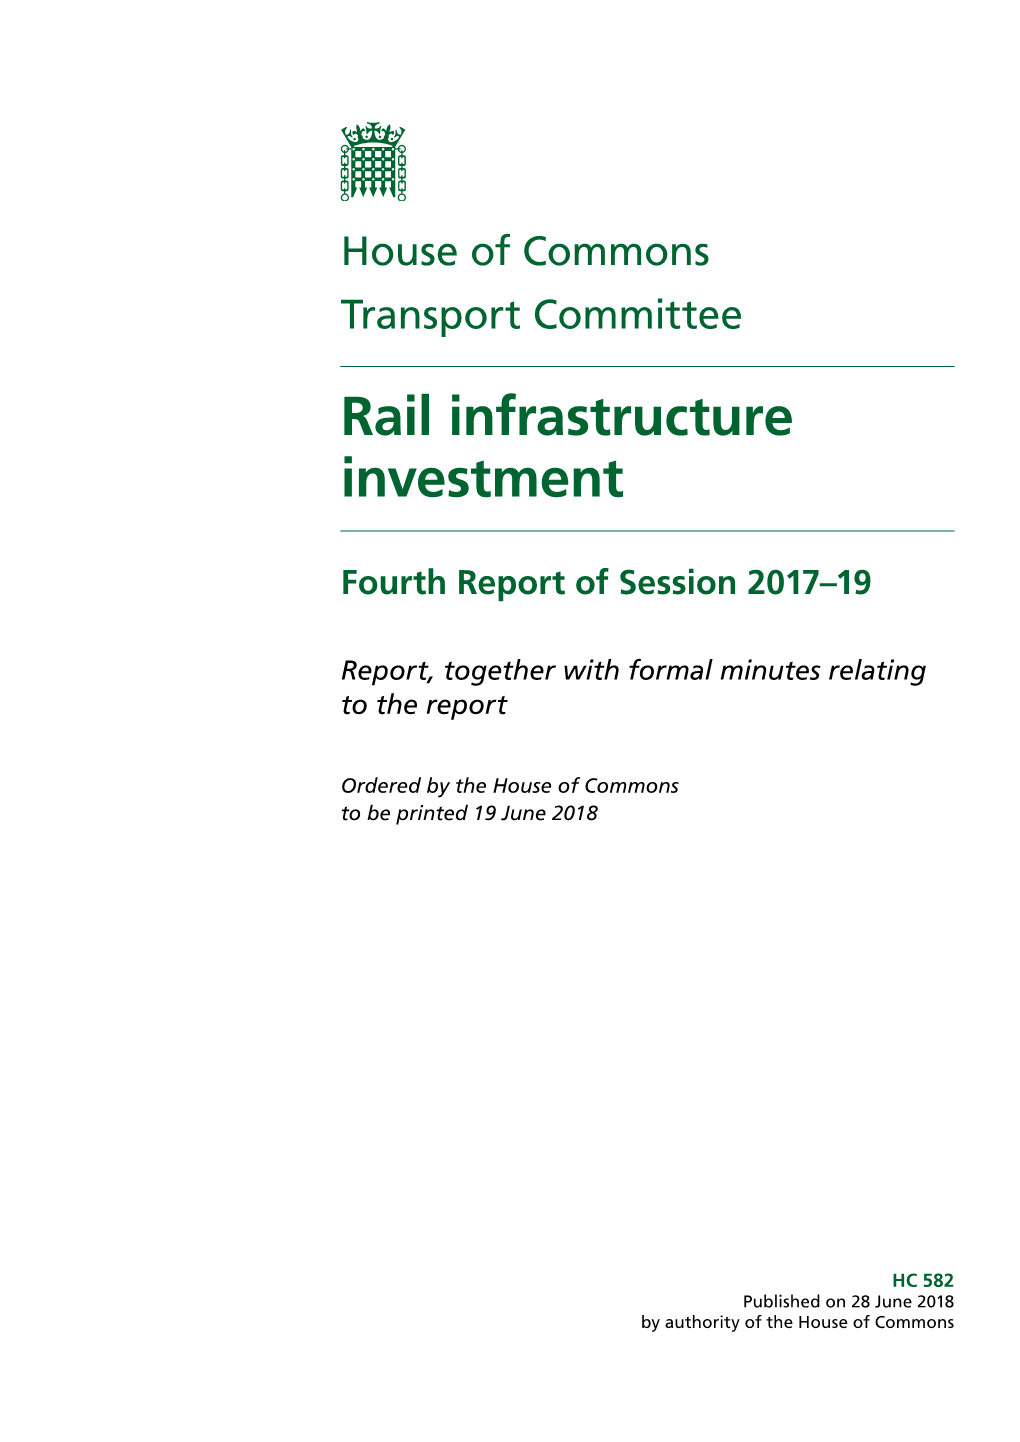 Rail Infrastructure Investment